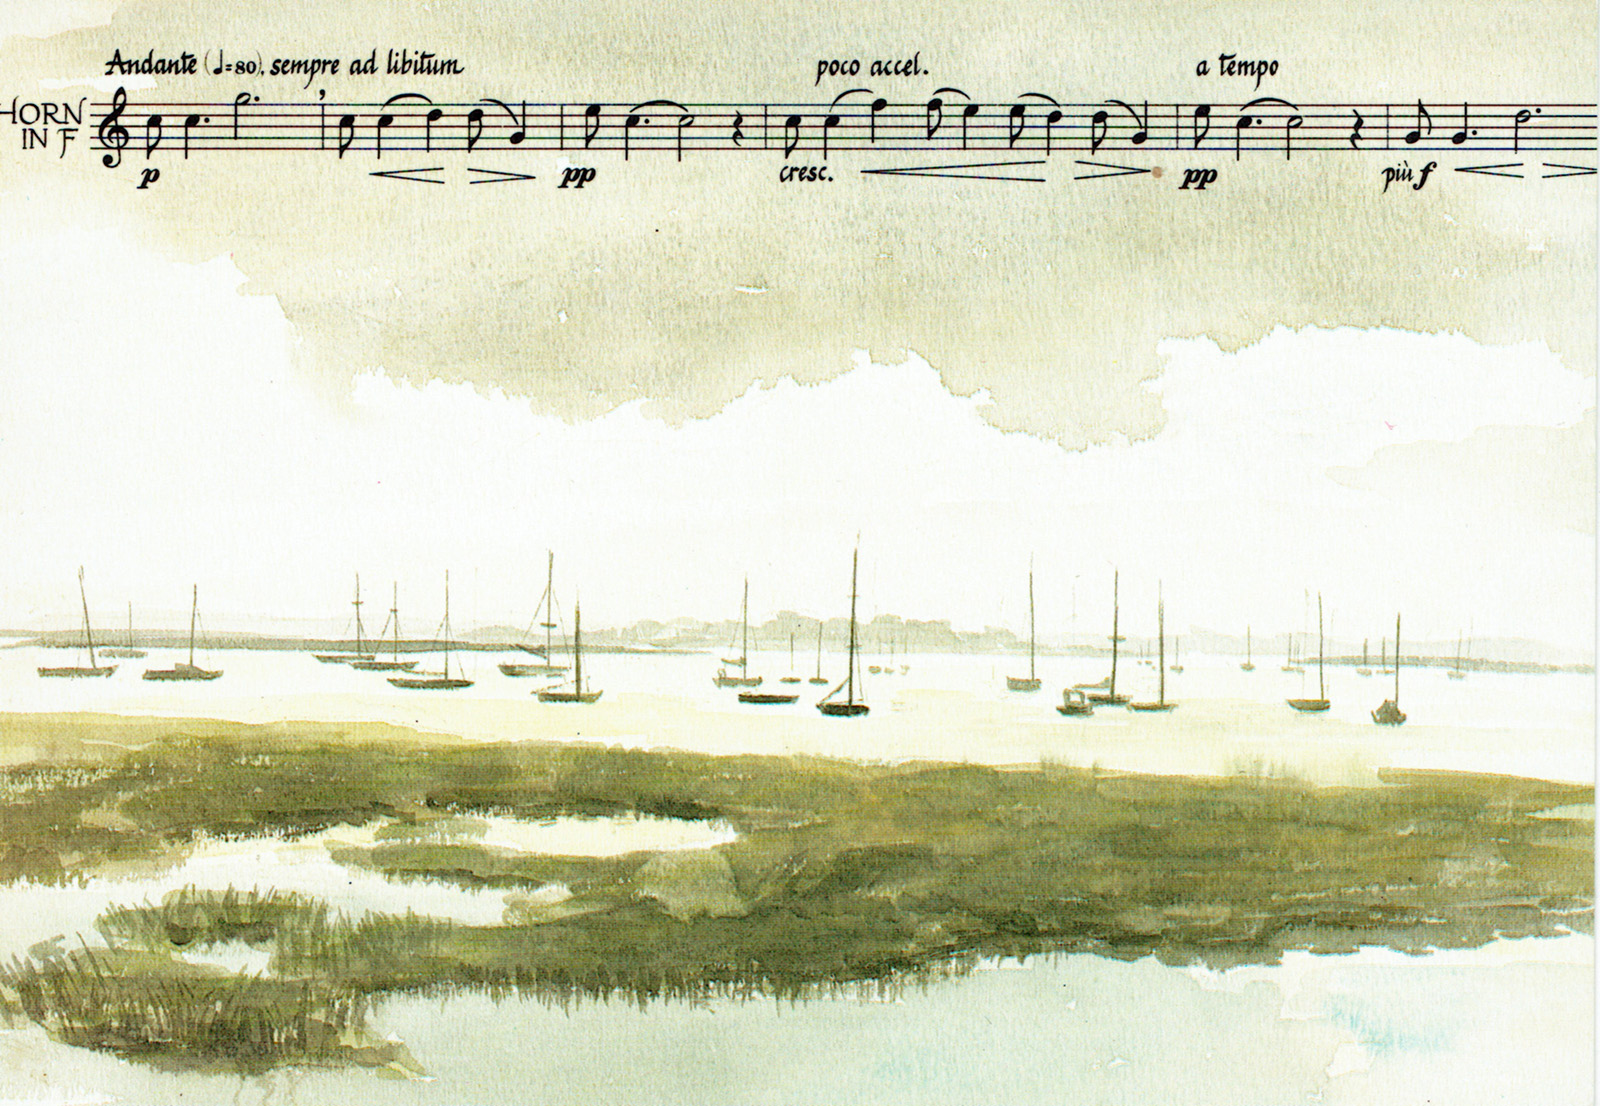 Picture postcard of an estuary scene with moored boats. There is horn music along the top of the card.